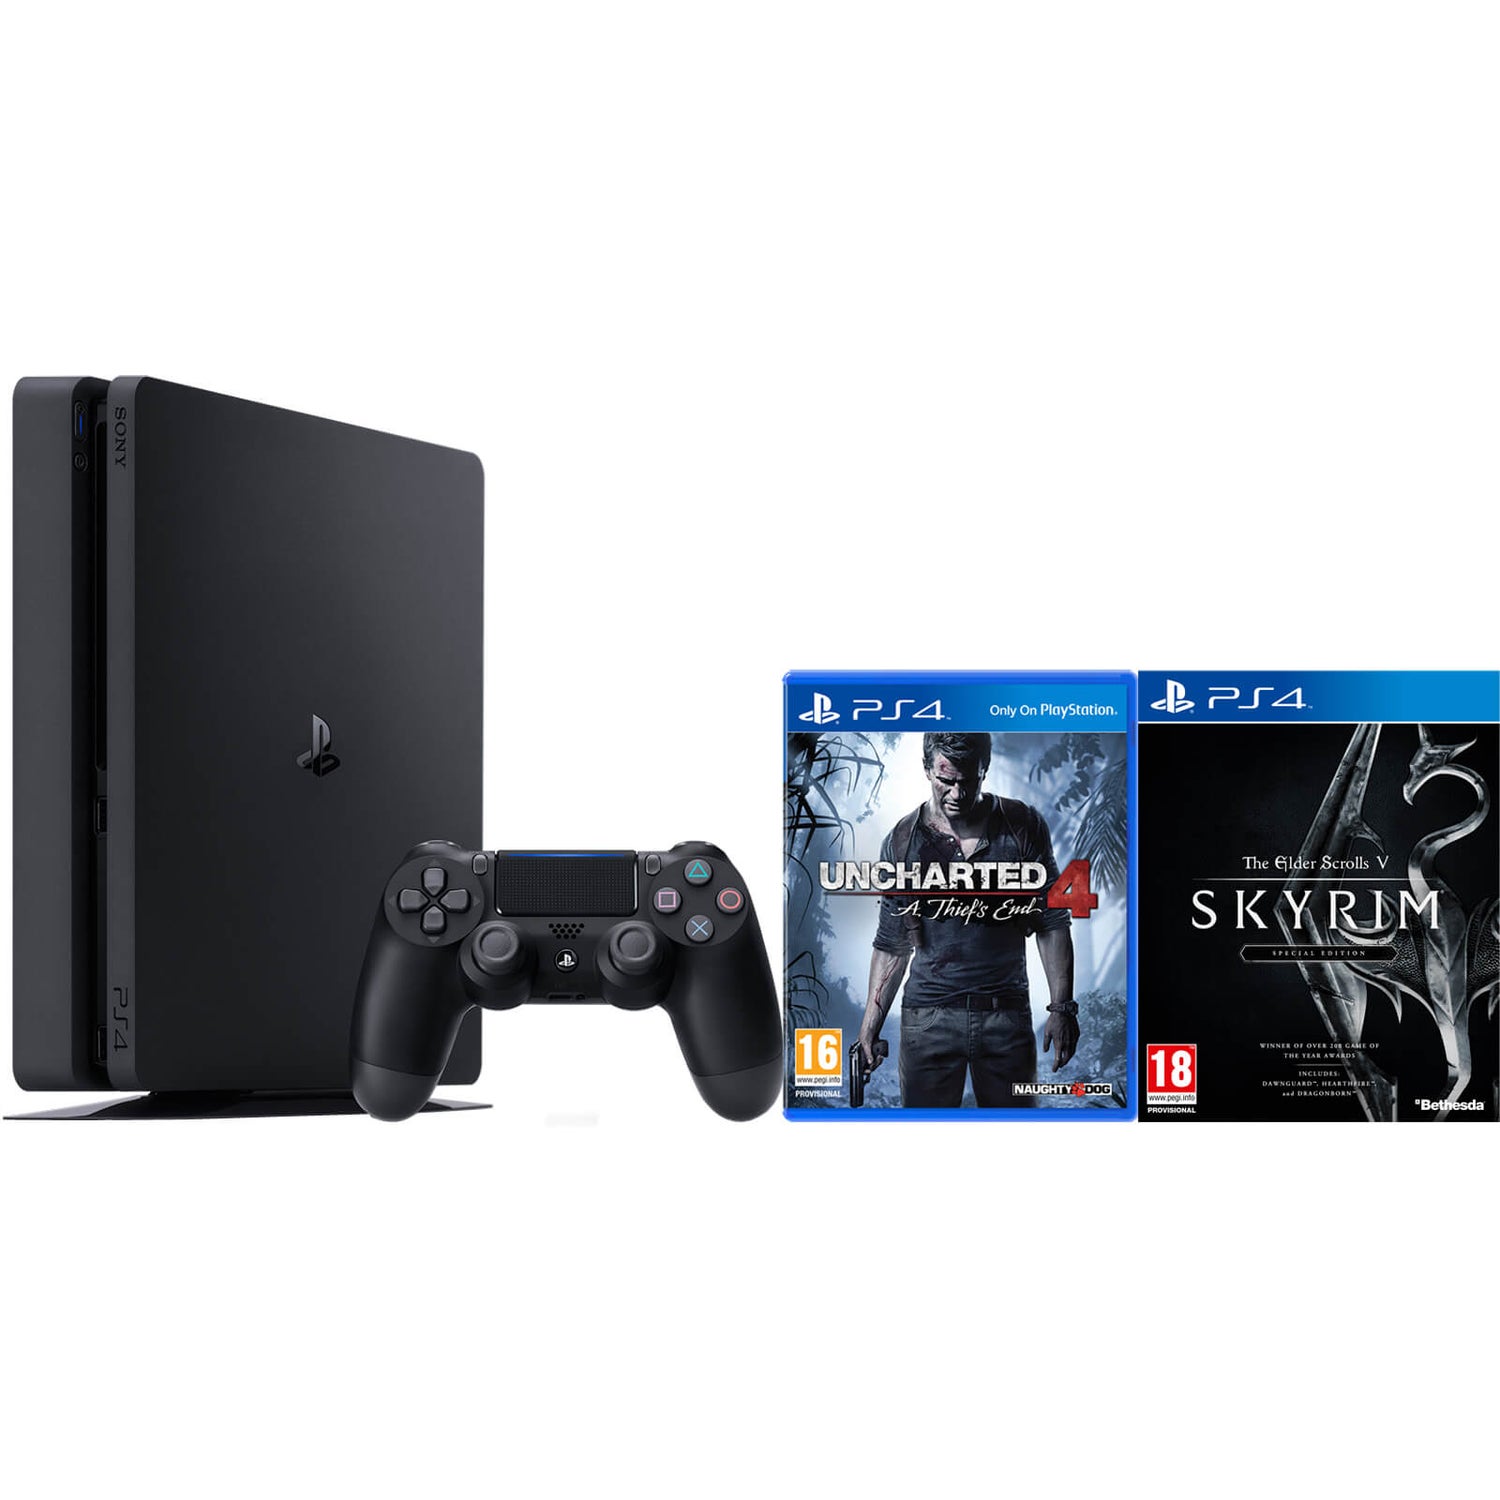 PlayStation 4 Slim 500GB Uncharted 4 and Skyrim Games Consoles - Zavvi US